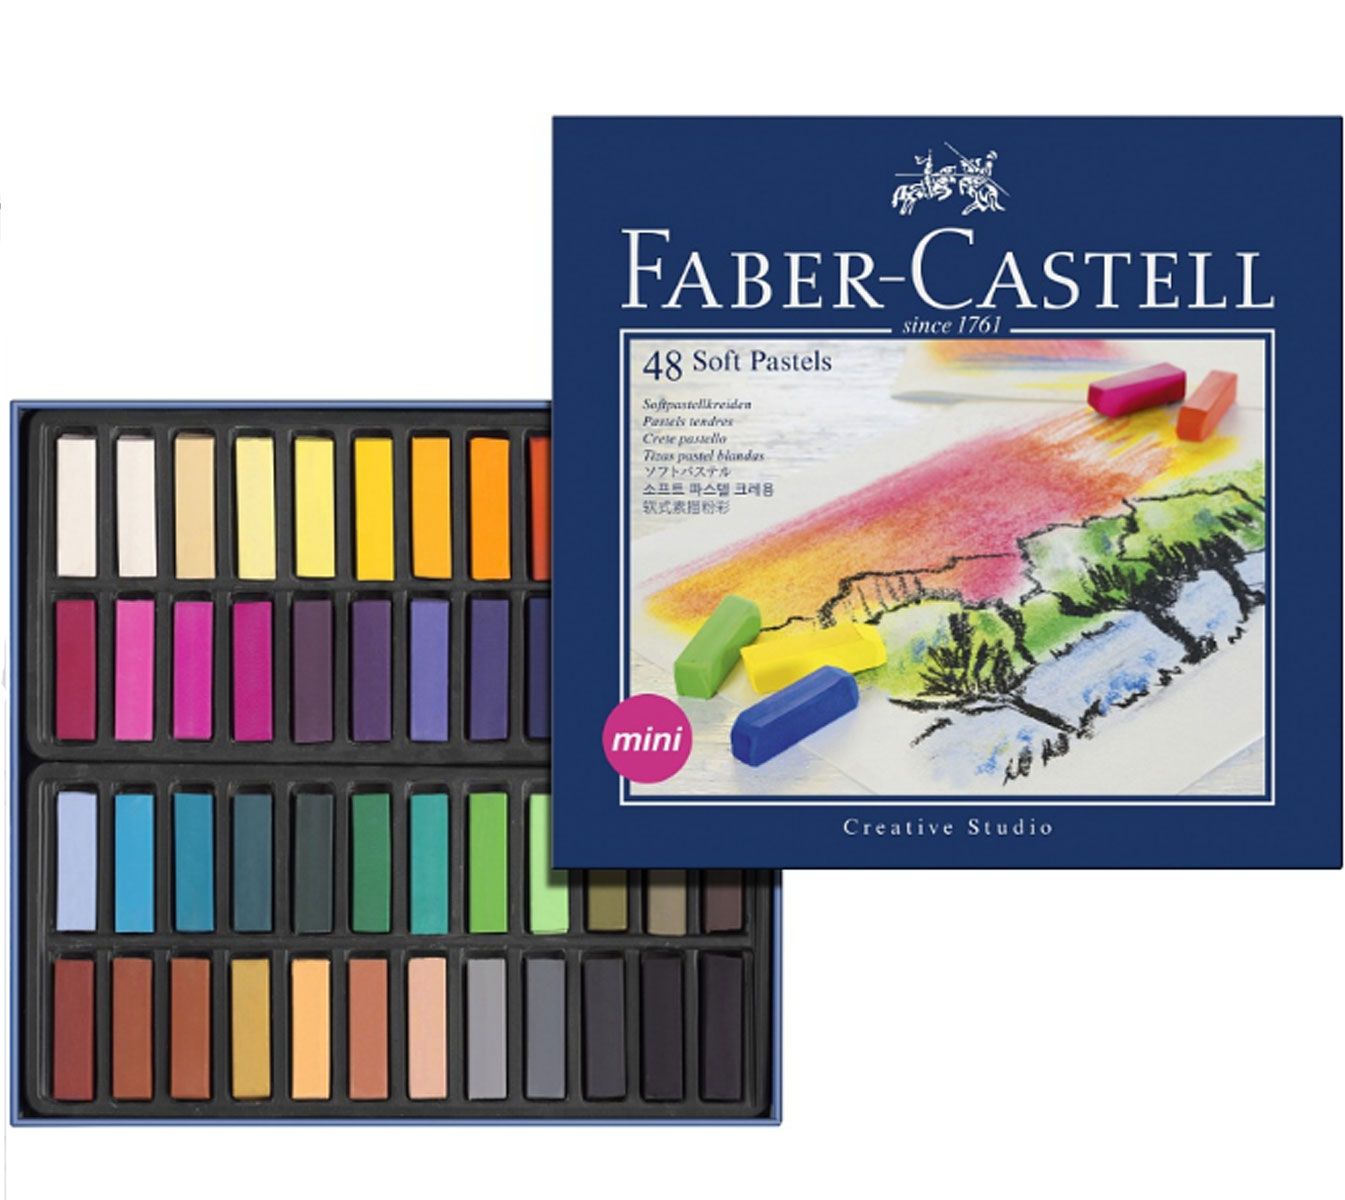  - Faber-Castell 